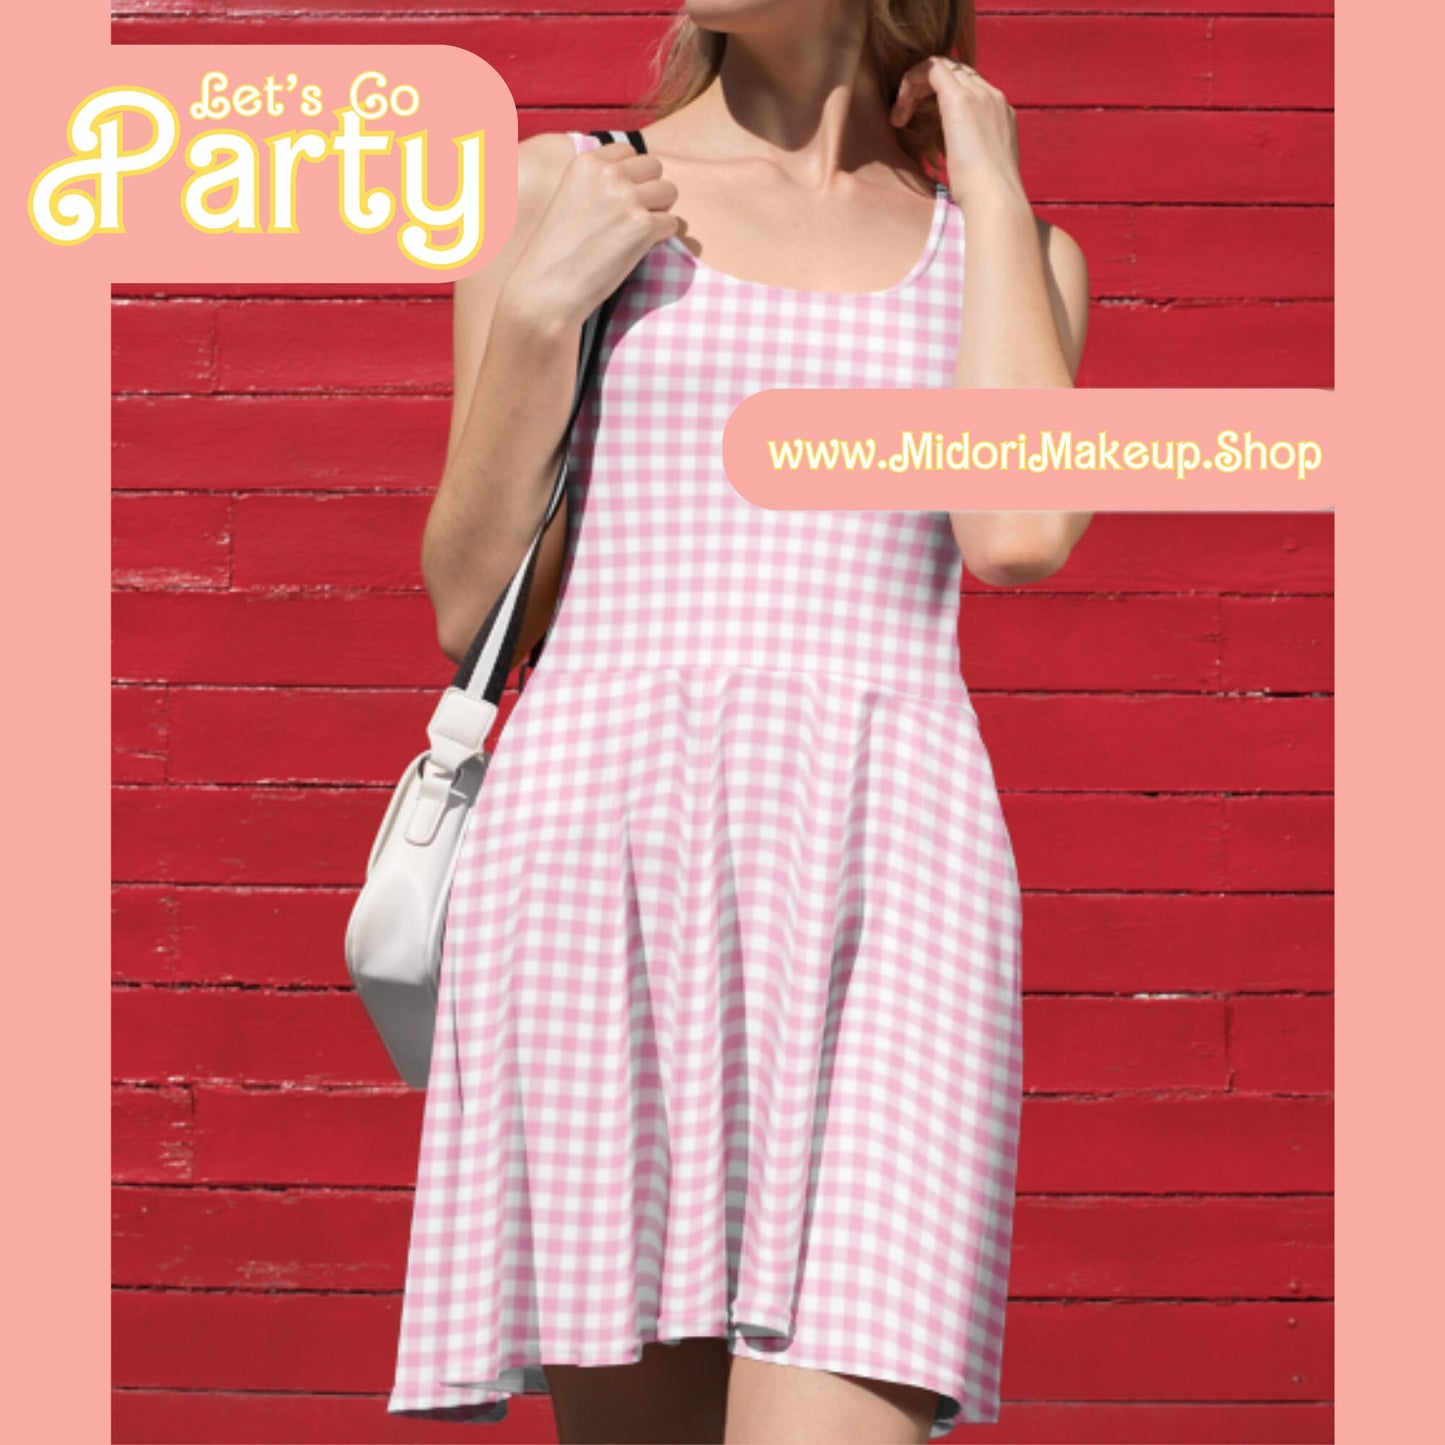 Y2K 90s Pink Gingham Checkered Skater Dress Sleeveless Fit Flare Mini Checkered Retro Cruise Wear Gift Cmon Lets Go Party Group Doll Costume